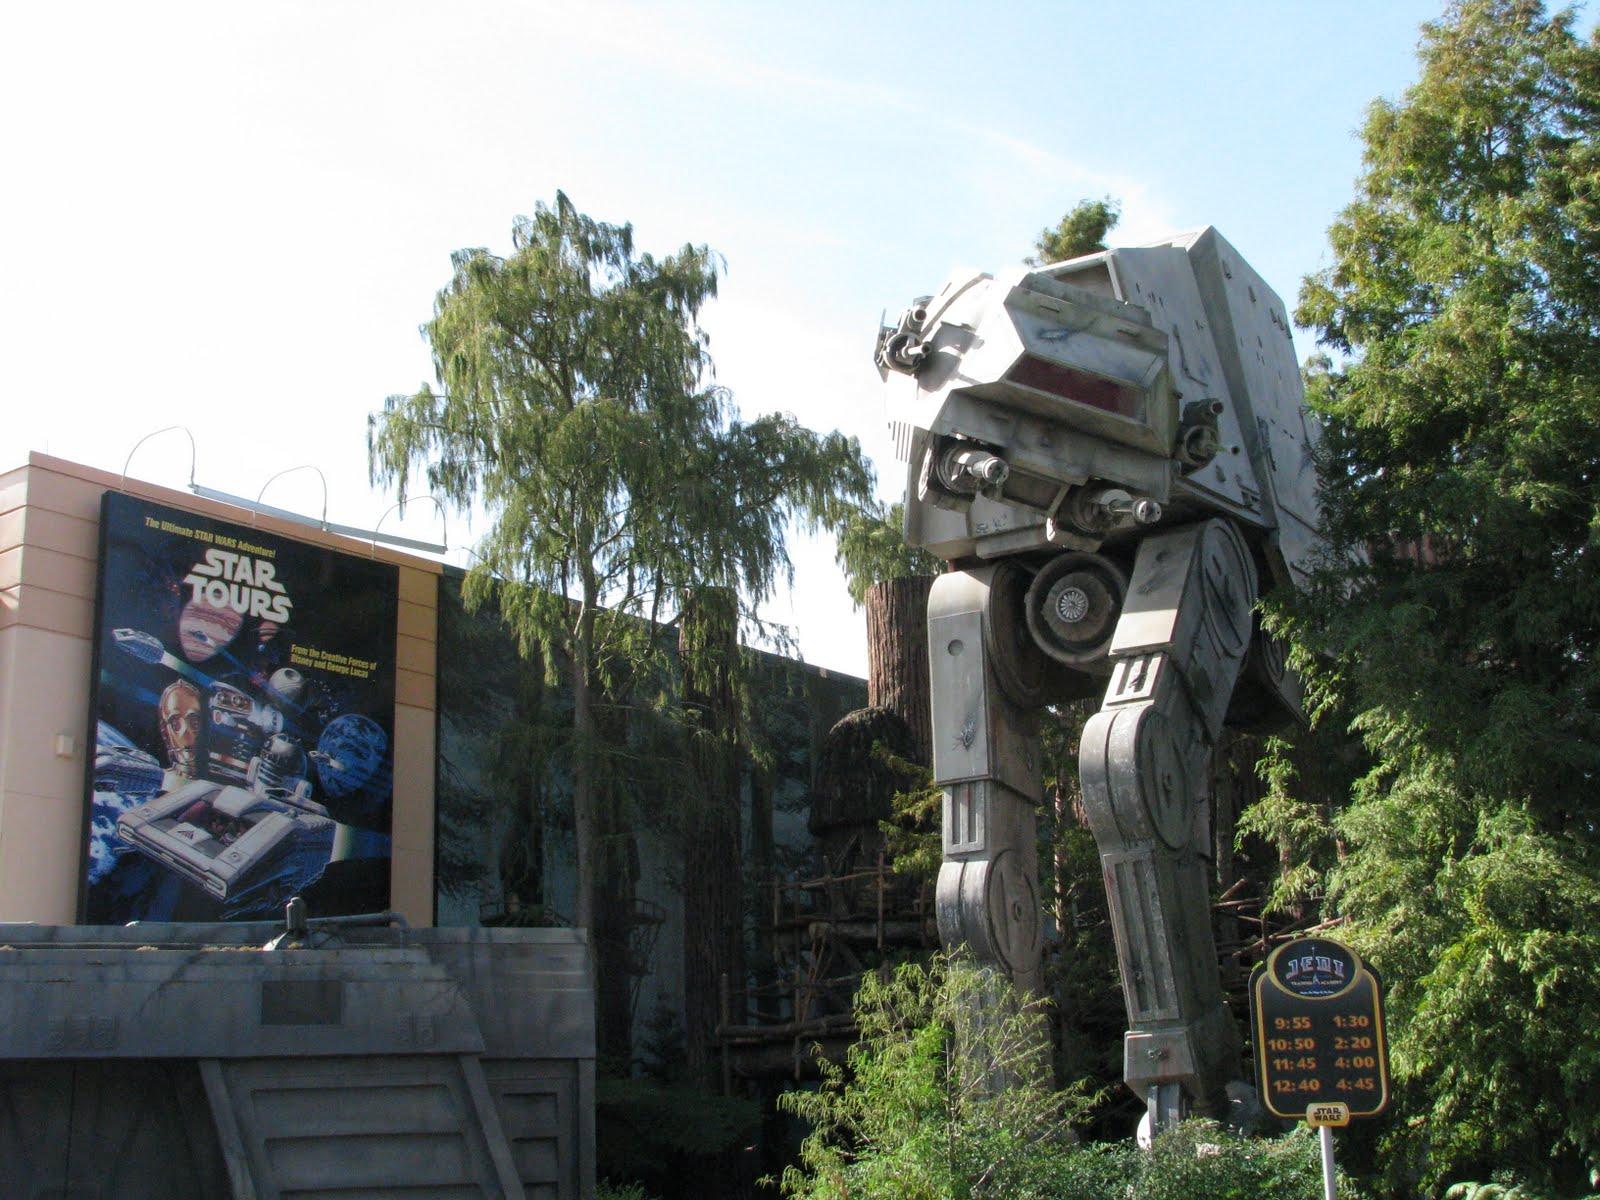 New Details About Star Tours 2.0 At Disney's Hollywood Studios